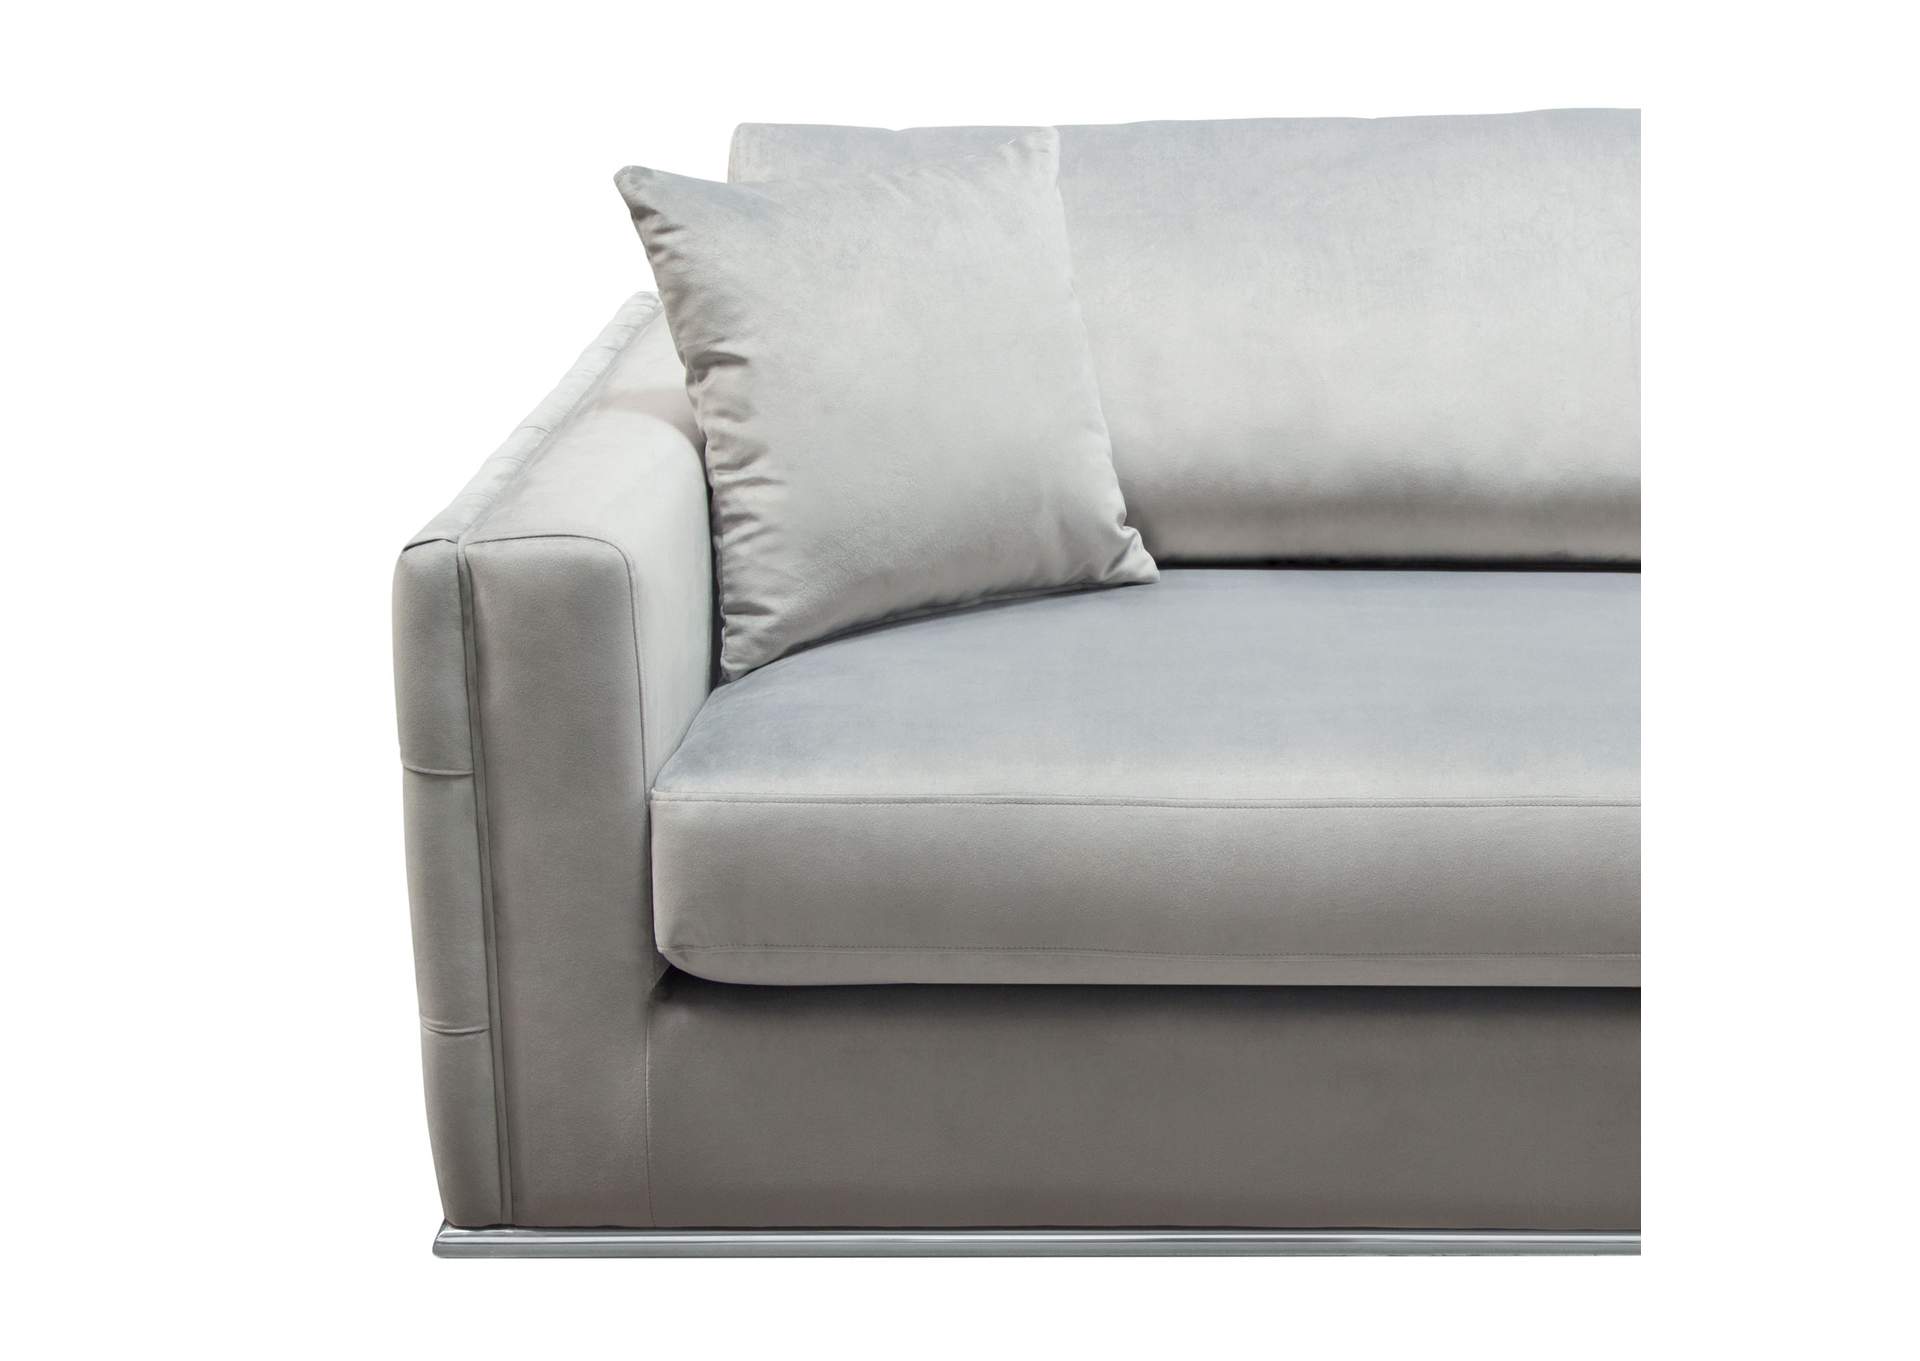 Envy Sofa in Platinum Grey Velvet with Tufted Outside Detail and Silver Metal Trim by Diamond Sofa,Diamond Sofa